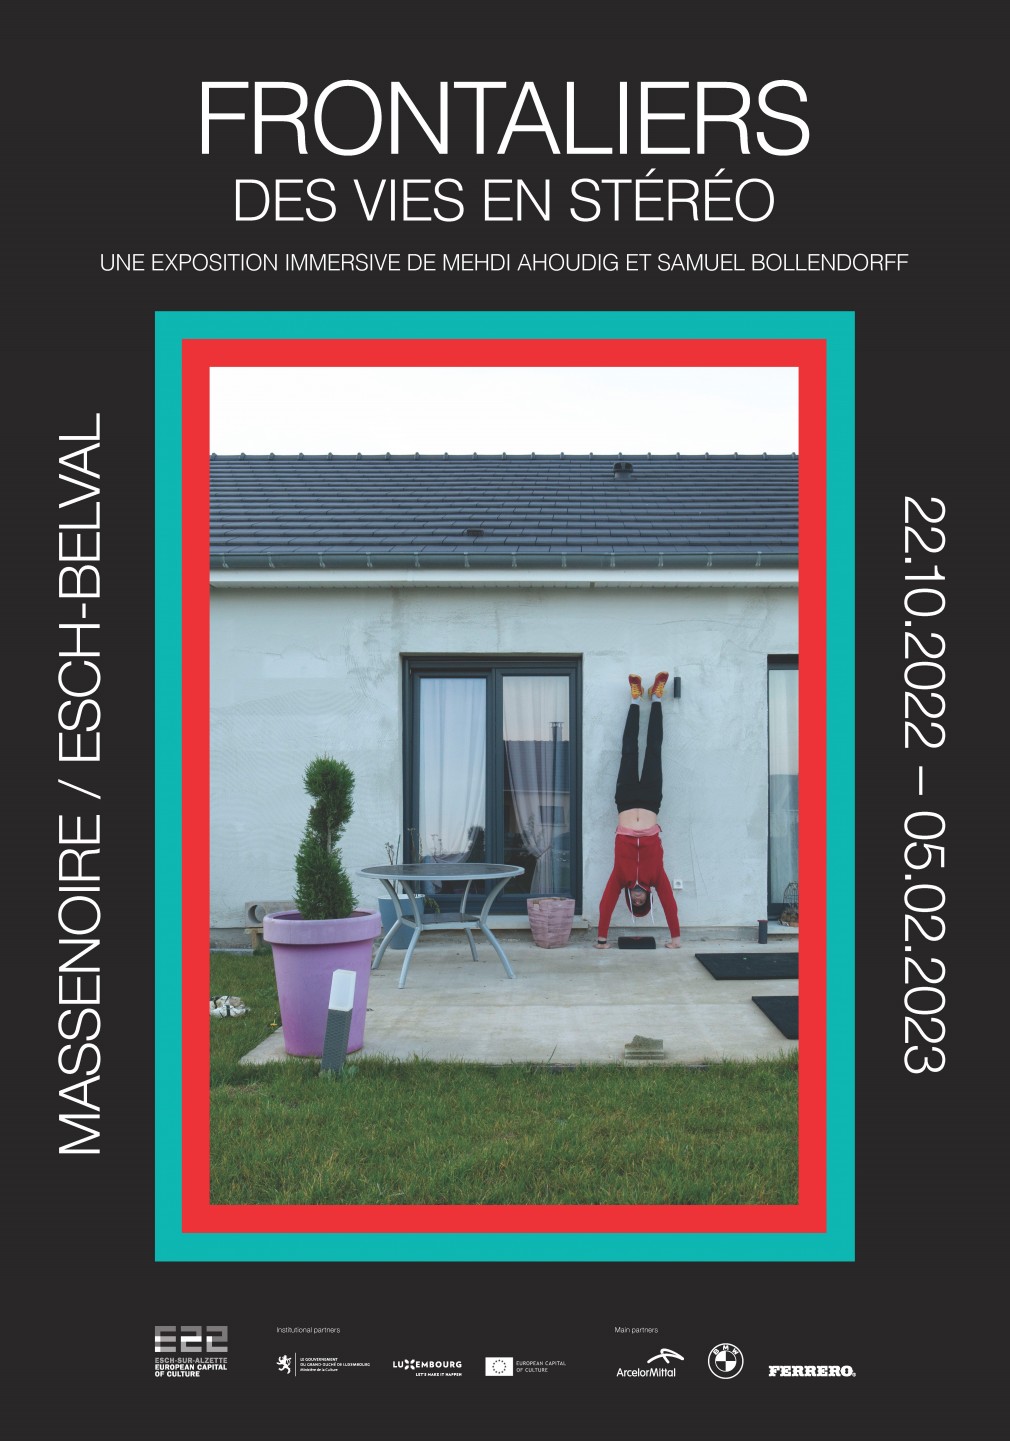 20220907-expo-frontaliers-affichea3